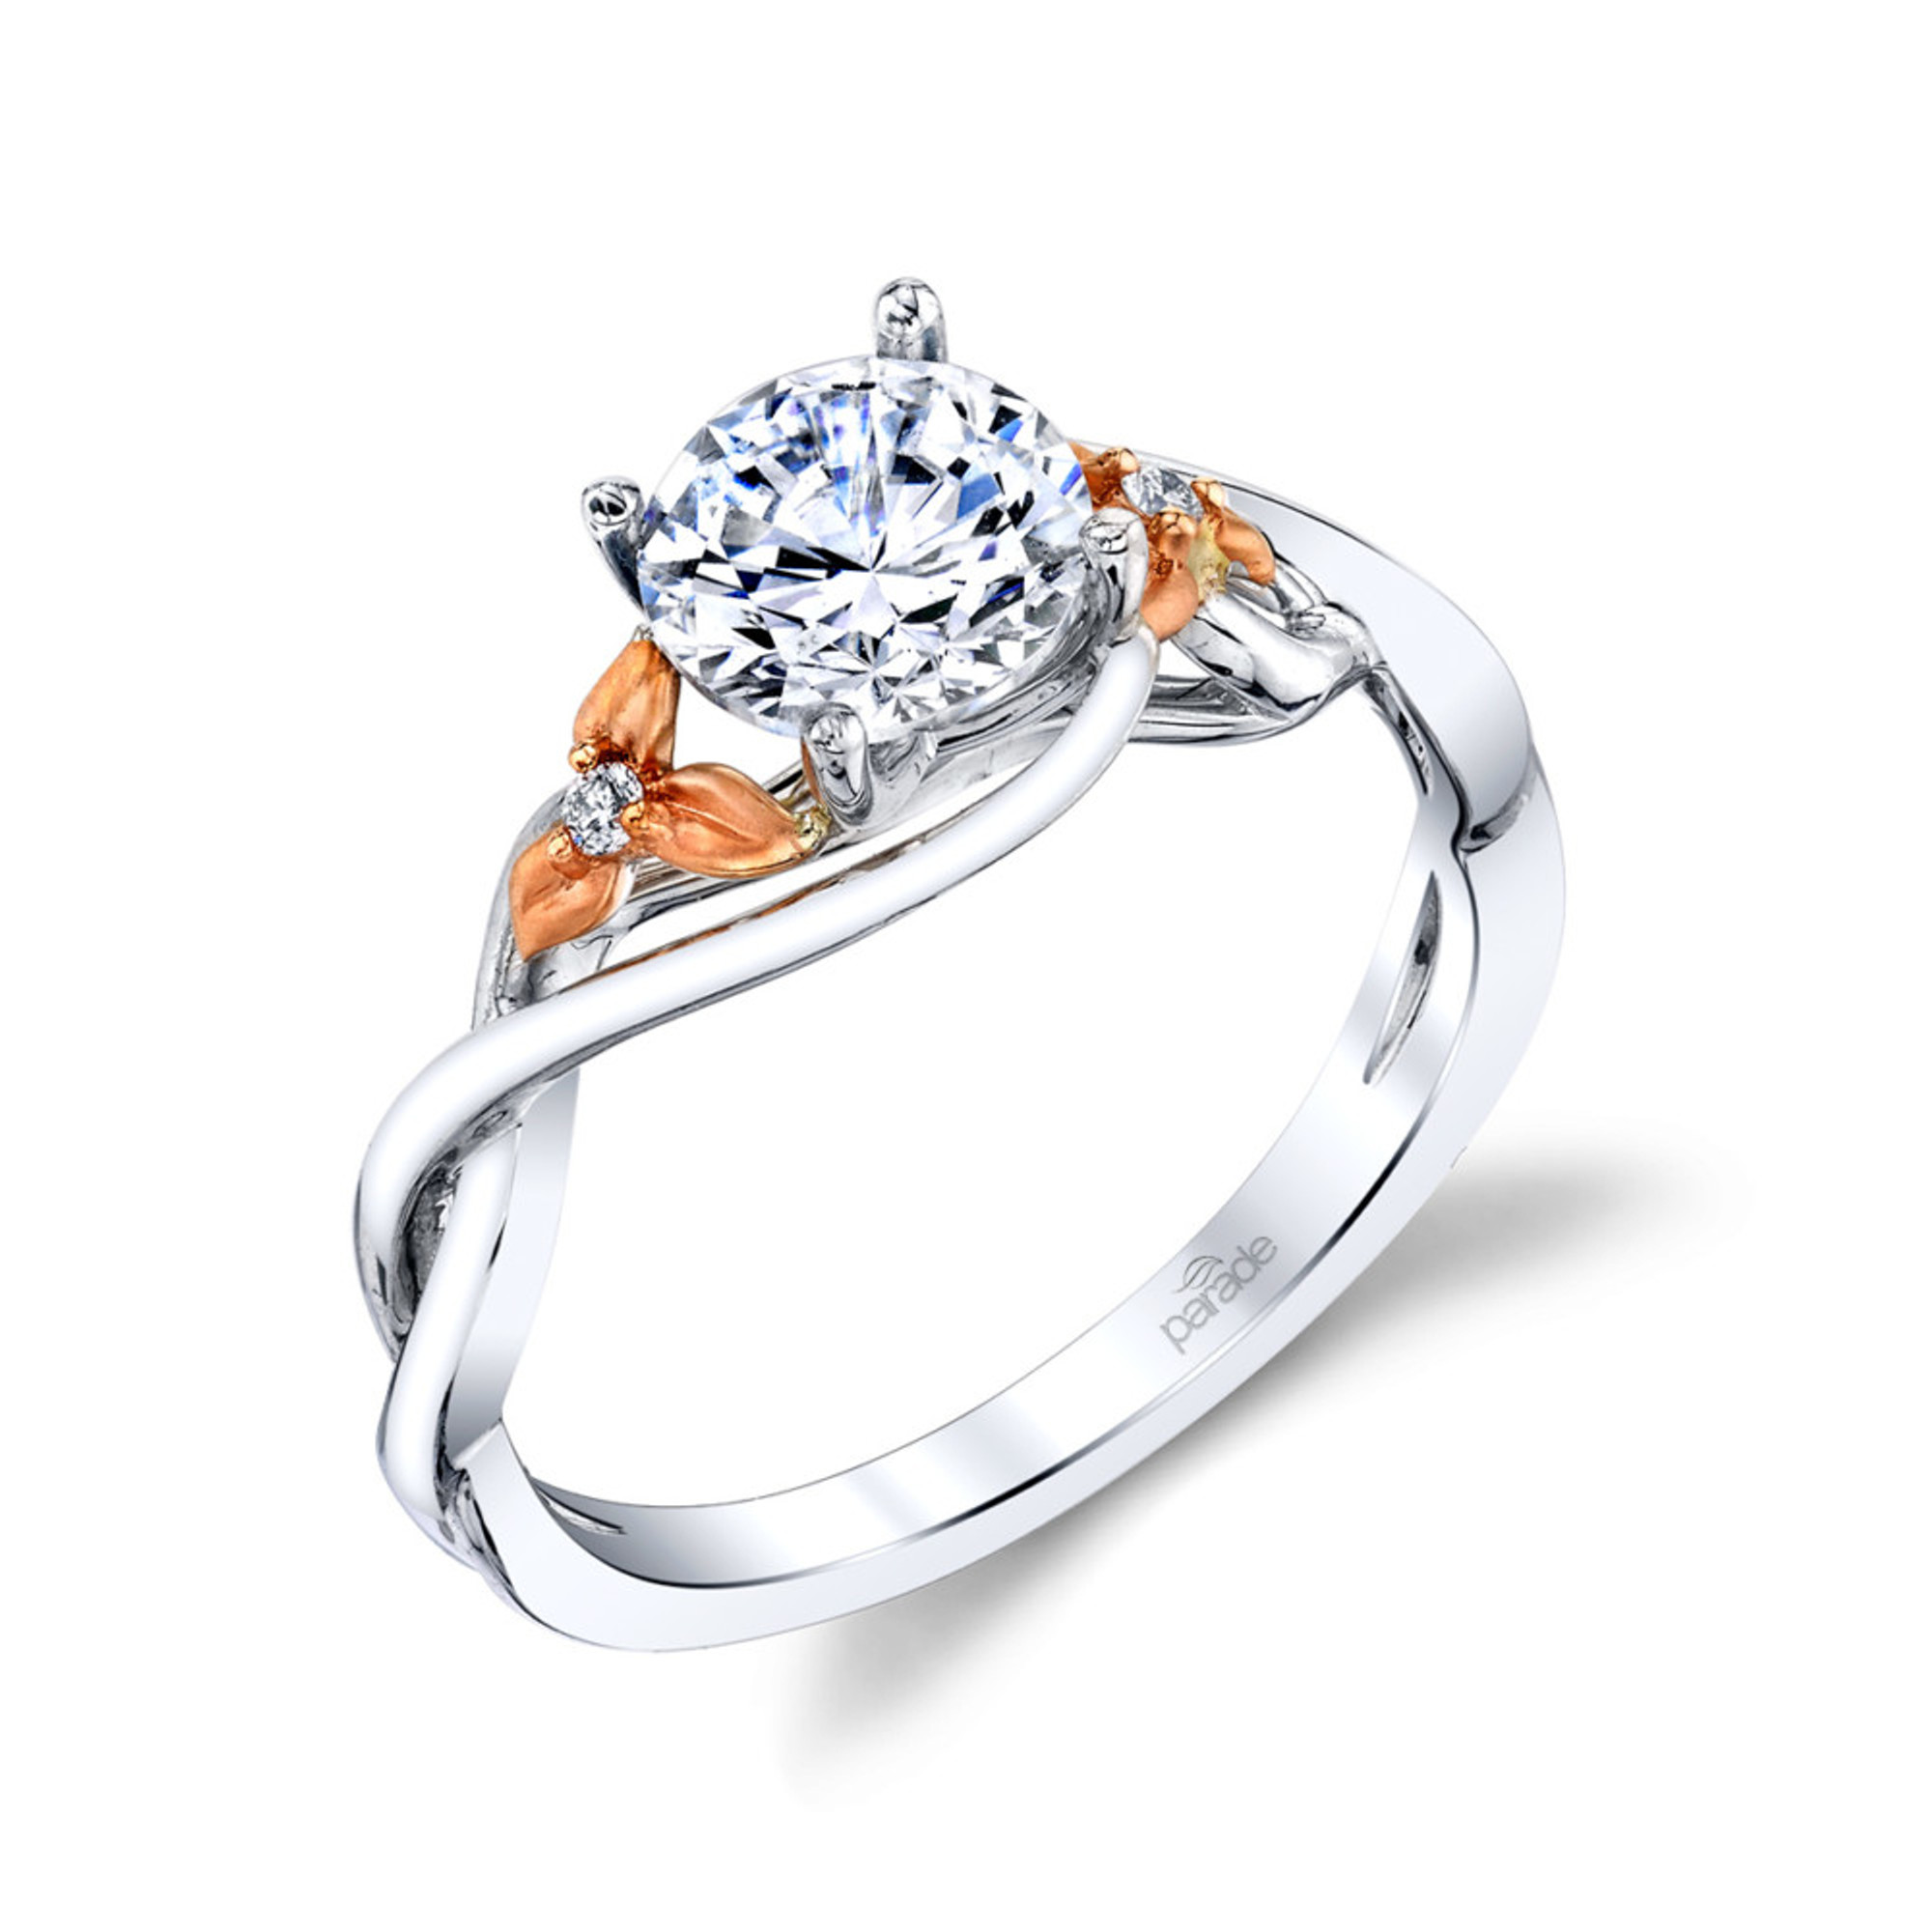 18kt White Gold Floral Diamond Engagement Ring by Parade